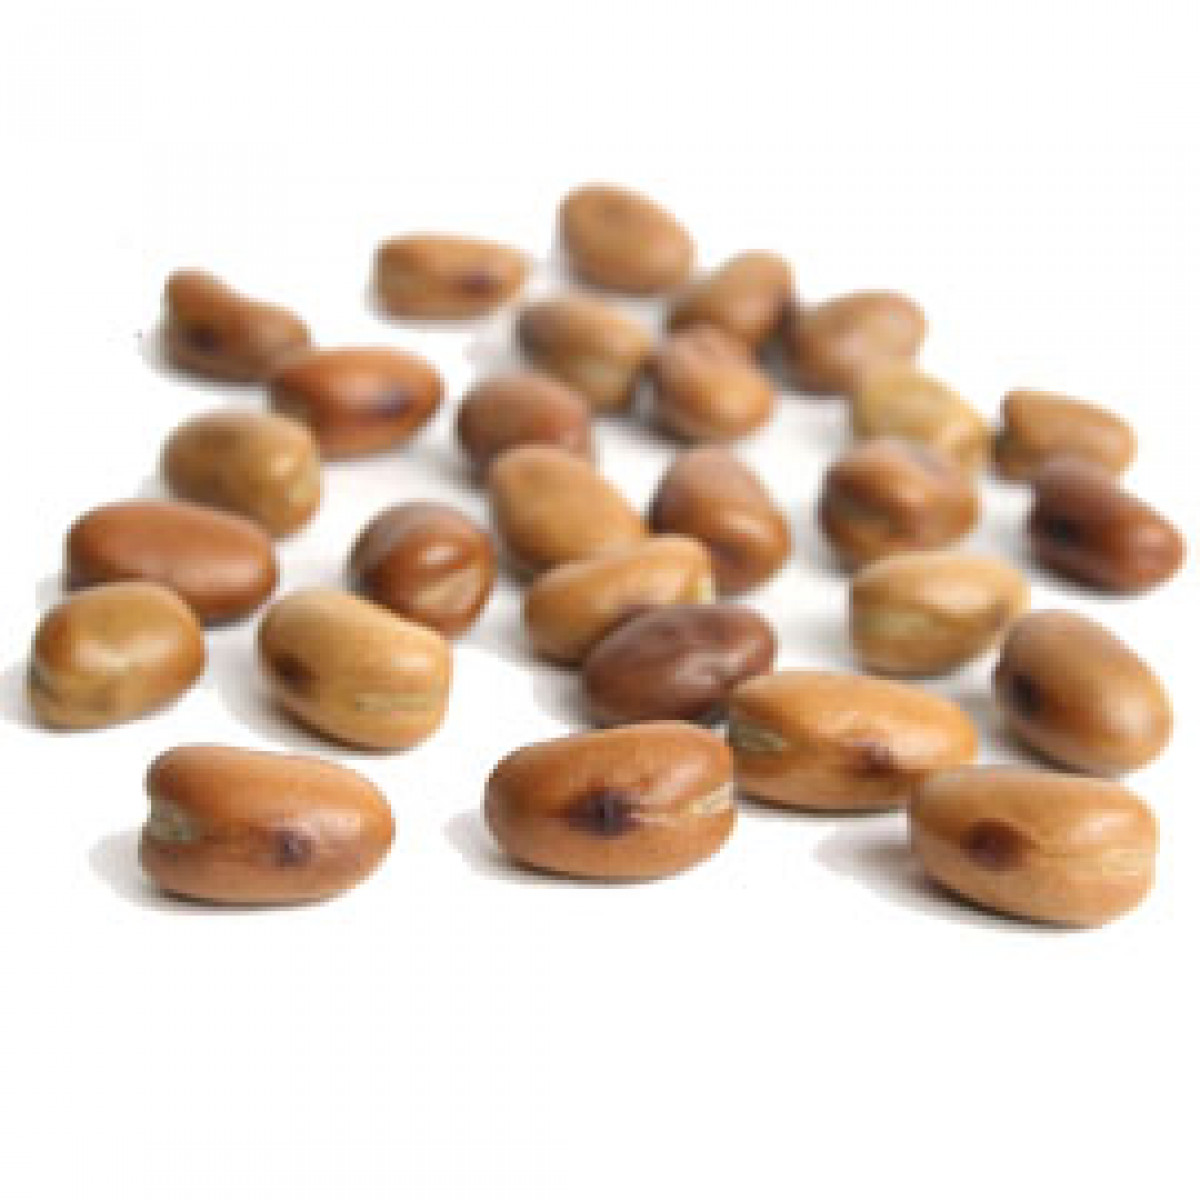 Product picture for Whole Dried Fava Beans